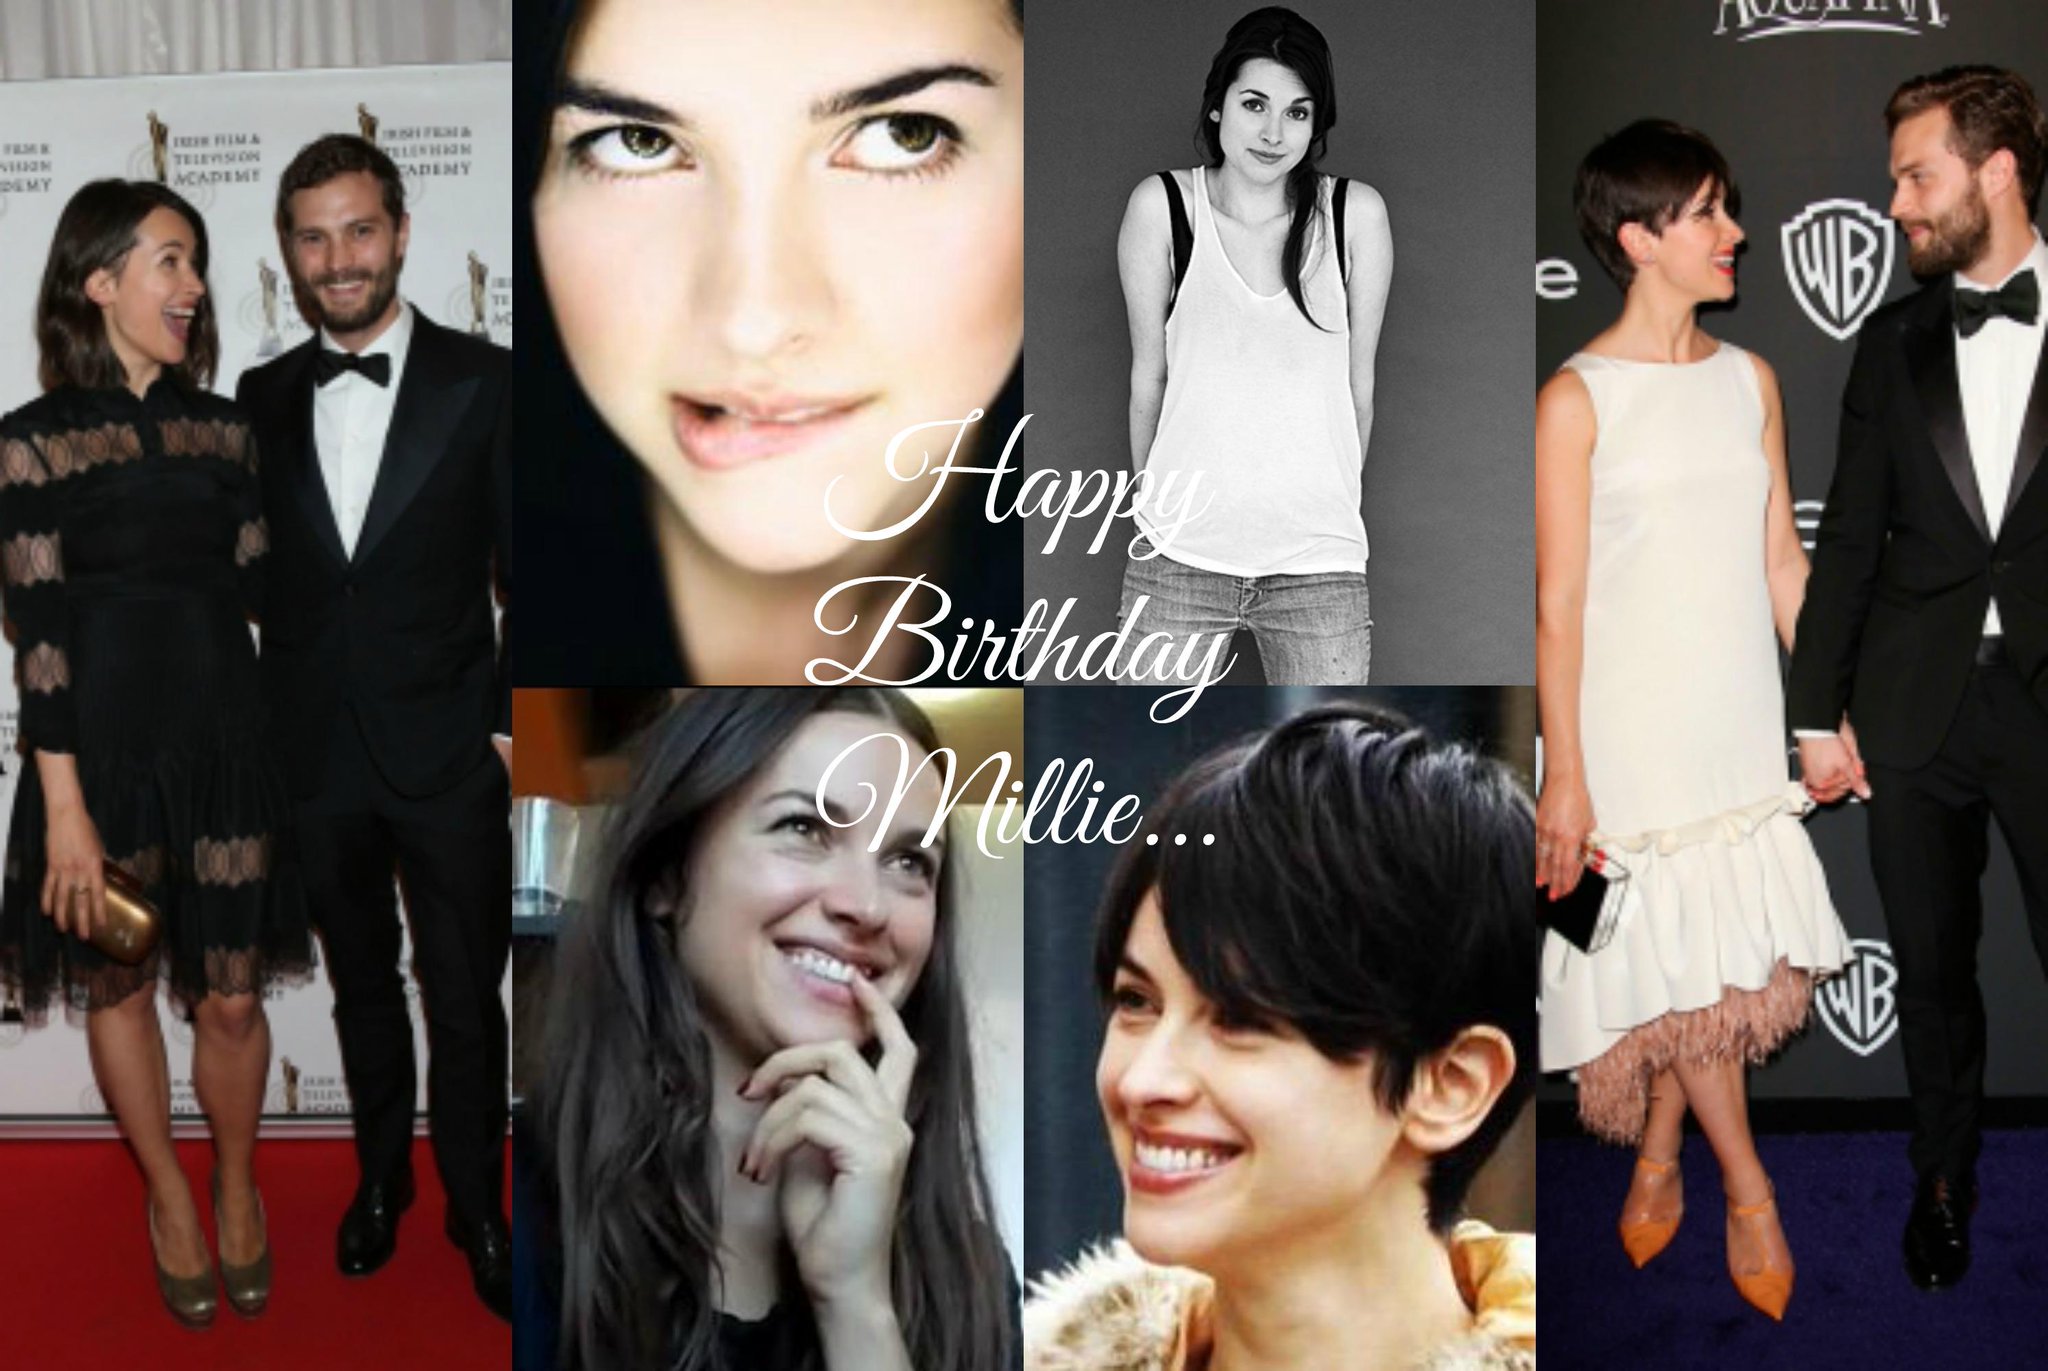 After midnight! Happy Birthday to the beautiful and amazing Amelia Warner        